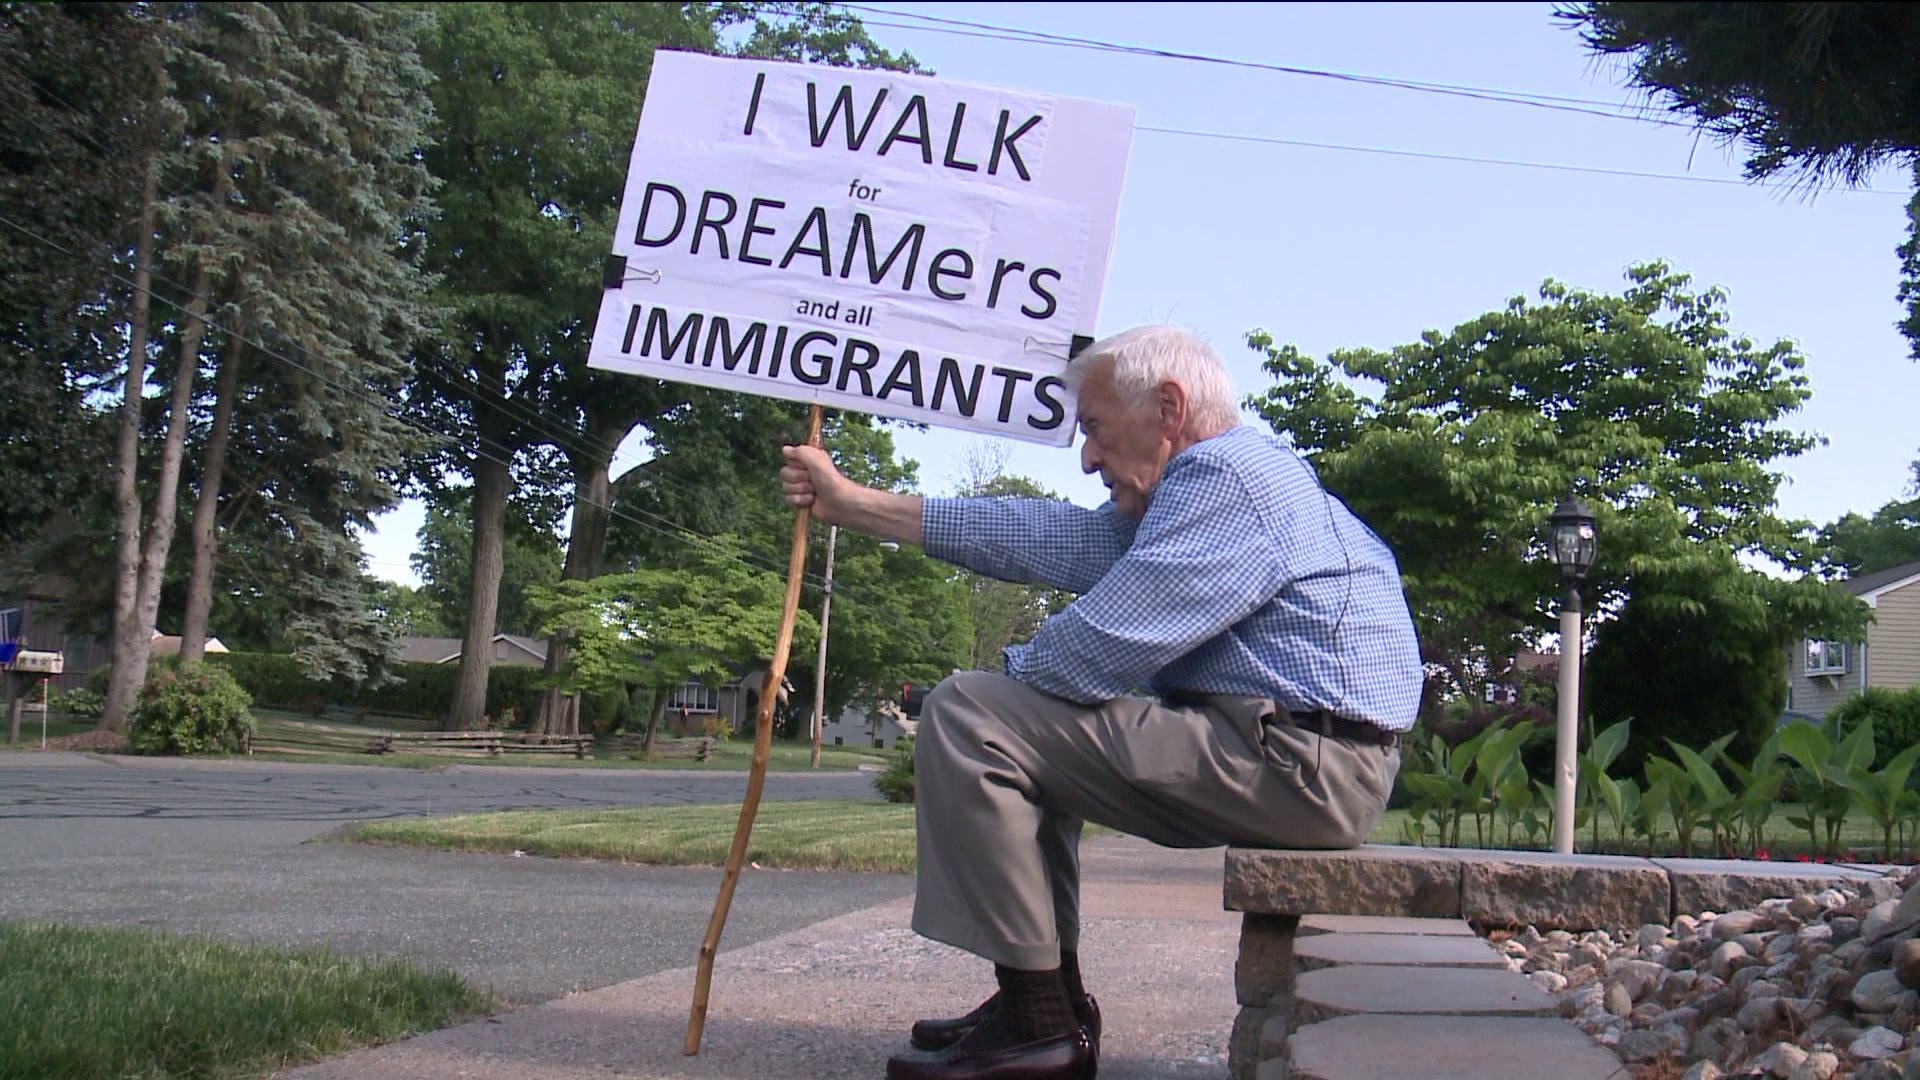 78-year-old Wethersfield man walks two miles daily for `Dreamers`